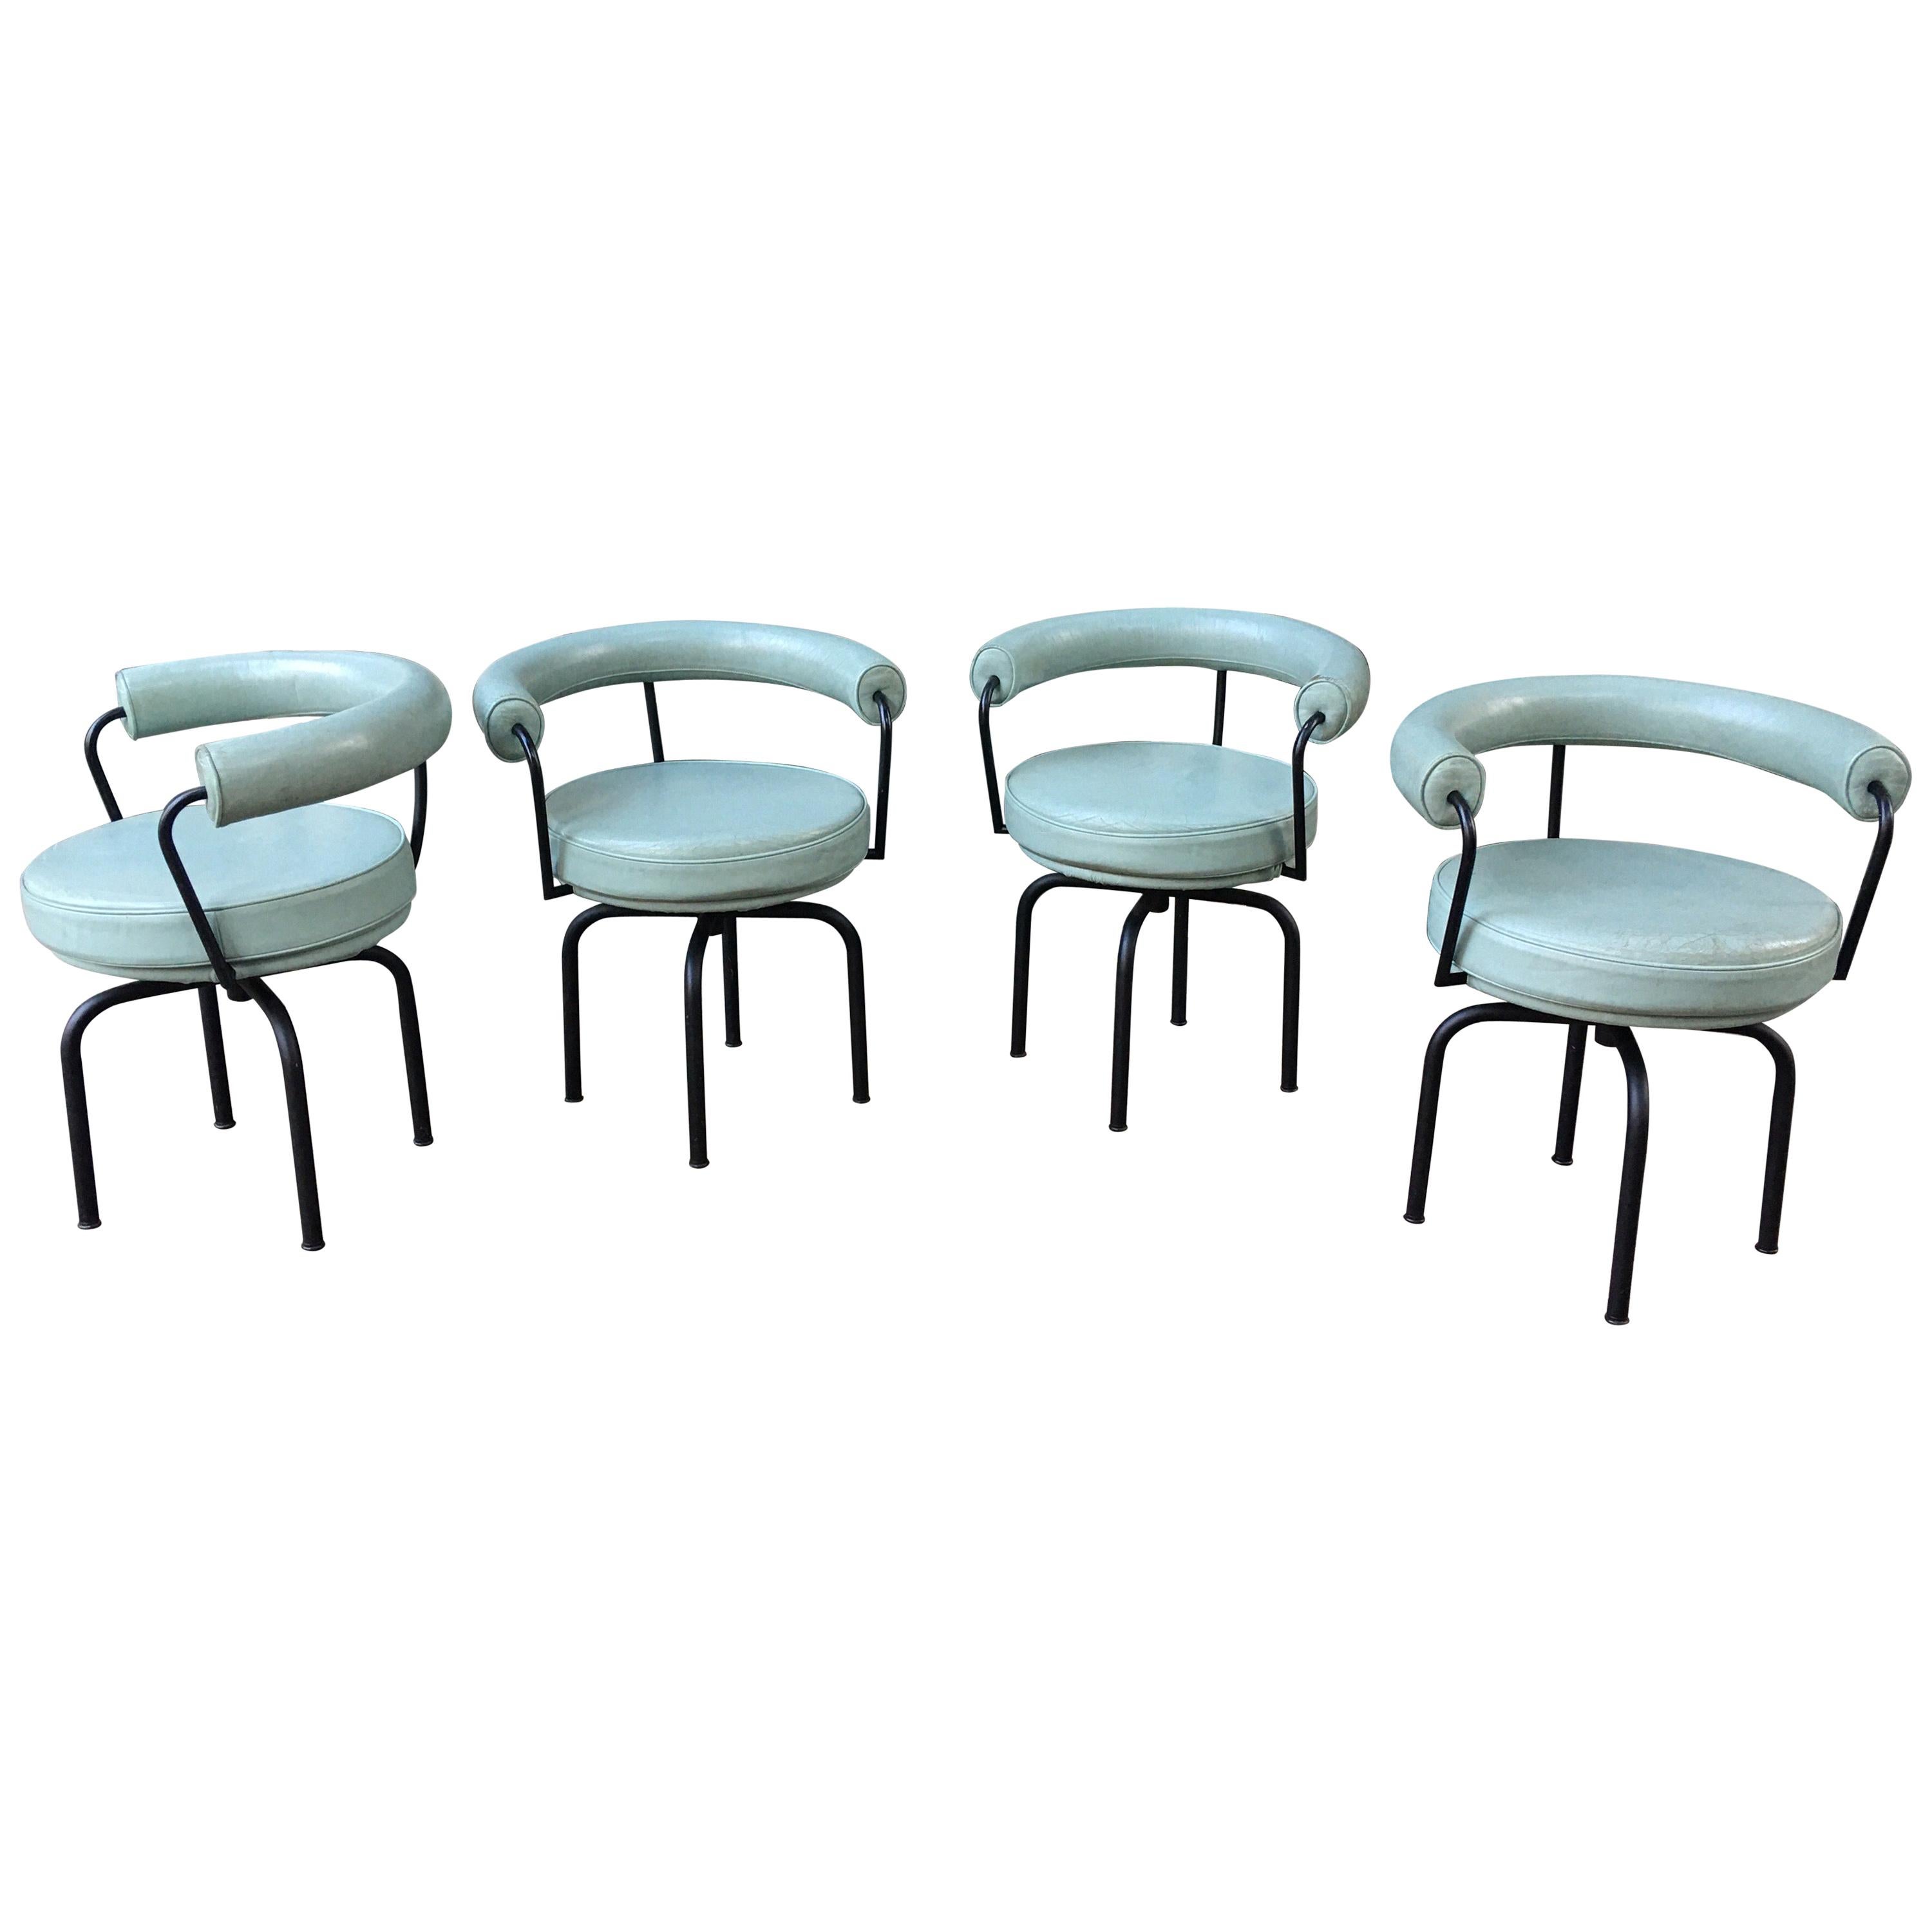 Set of 4 Cassina Swivel LC7 Chairs by Le Corbusier, Perriand & Jenneret